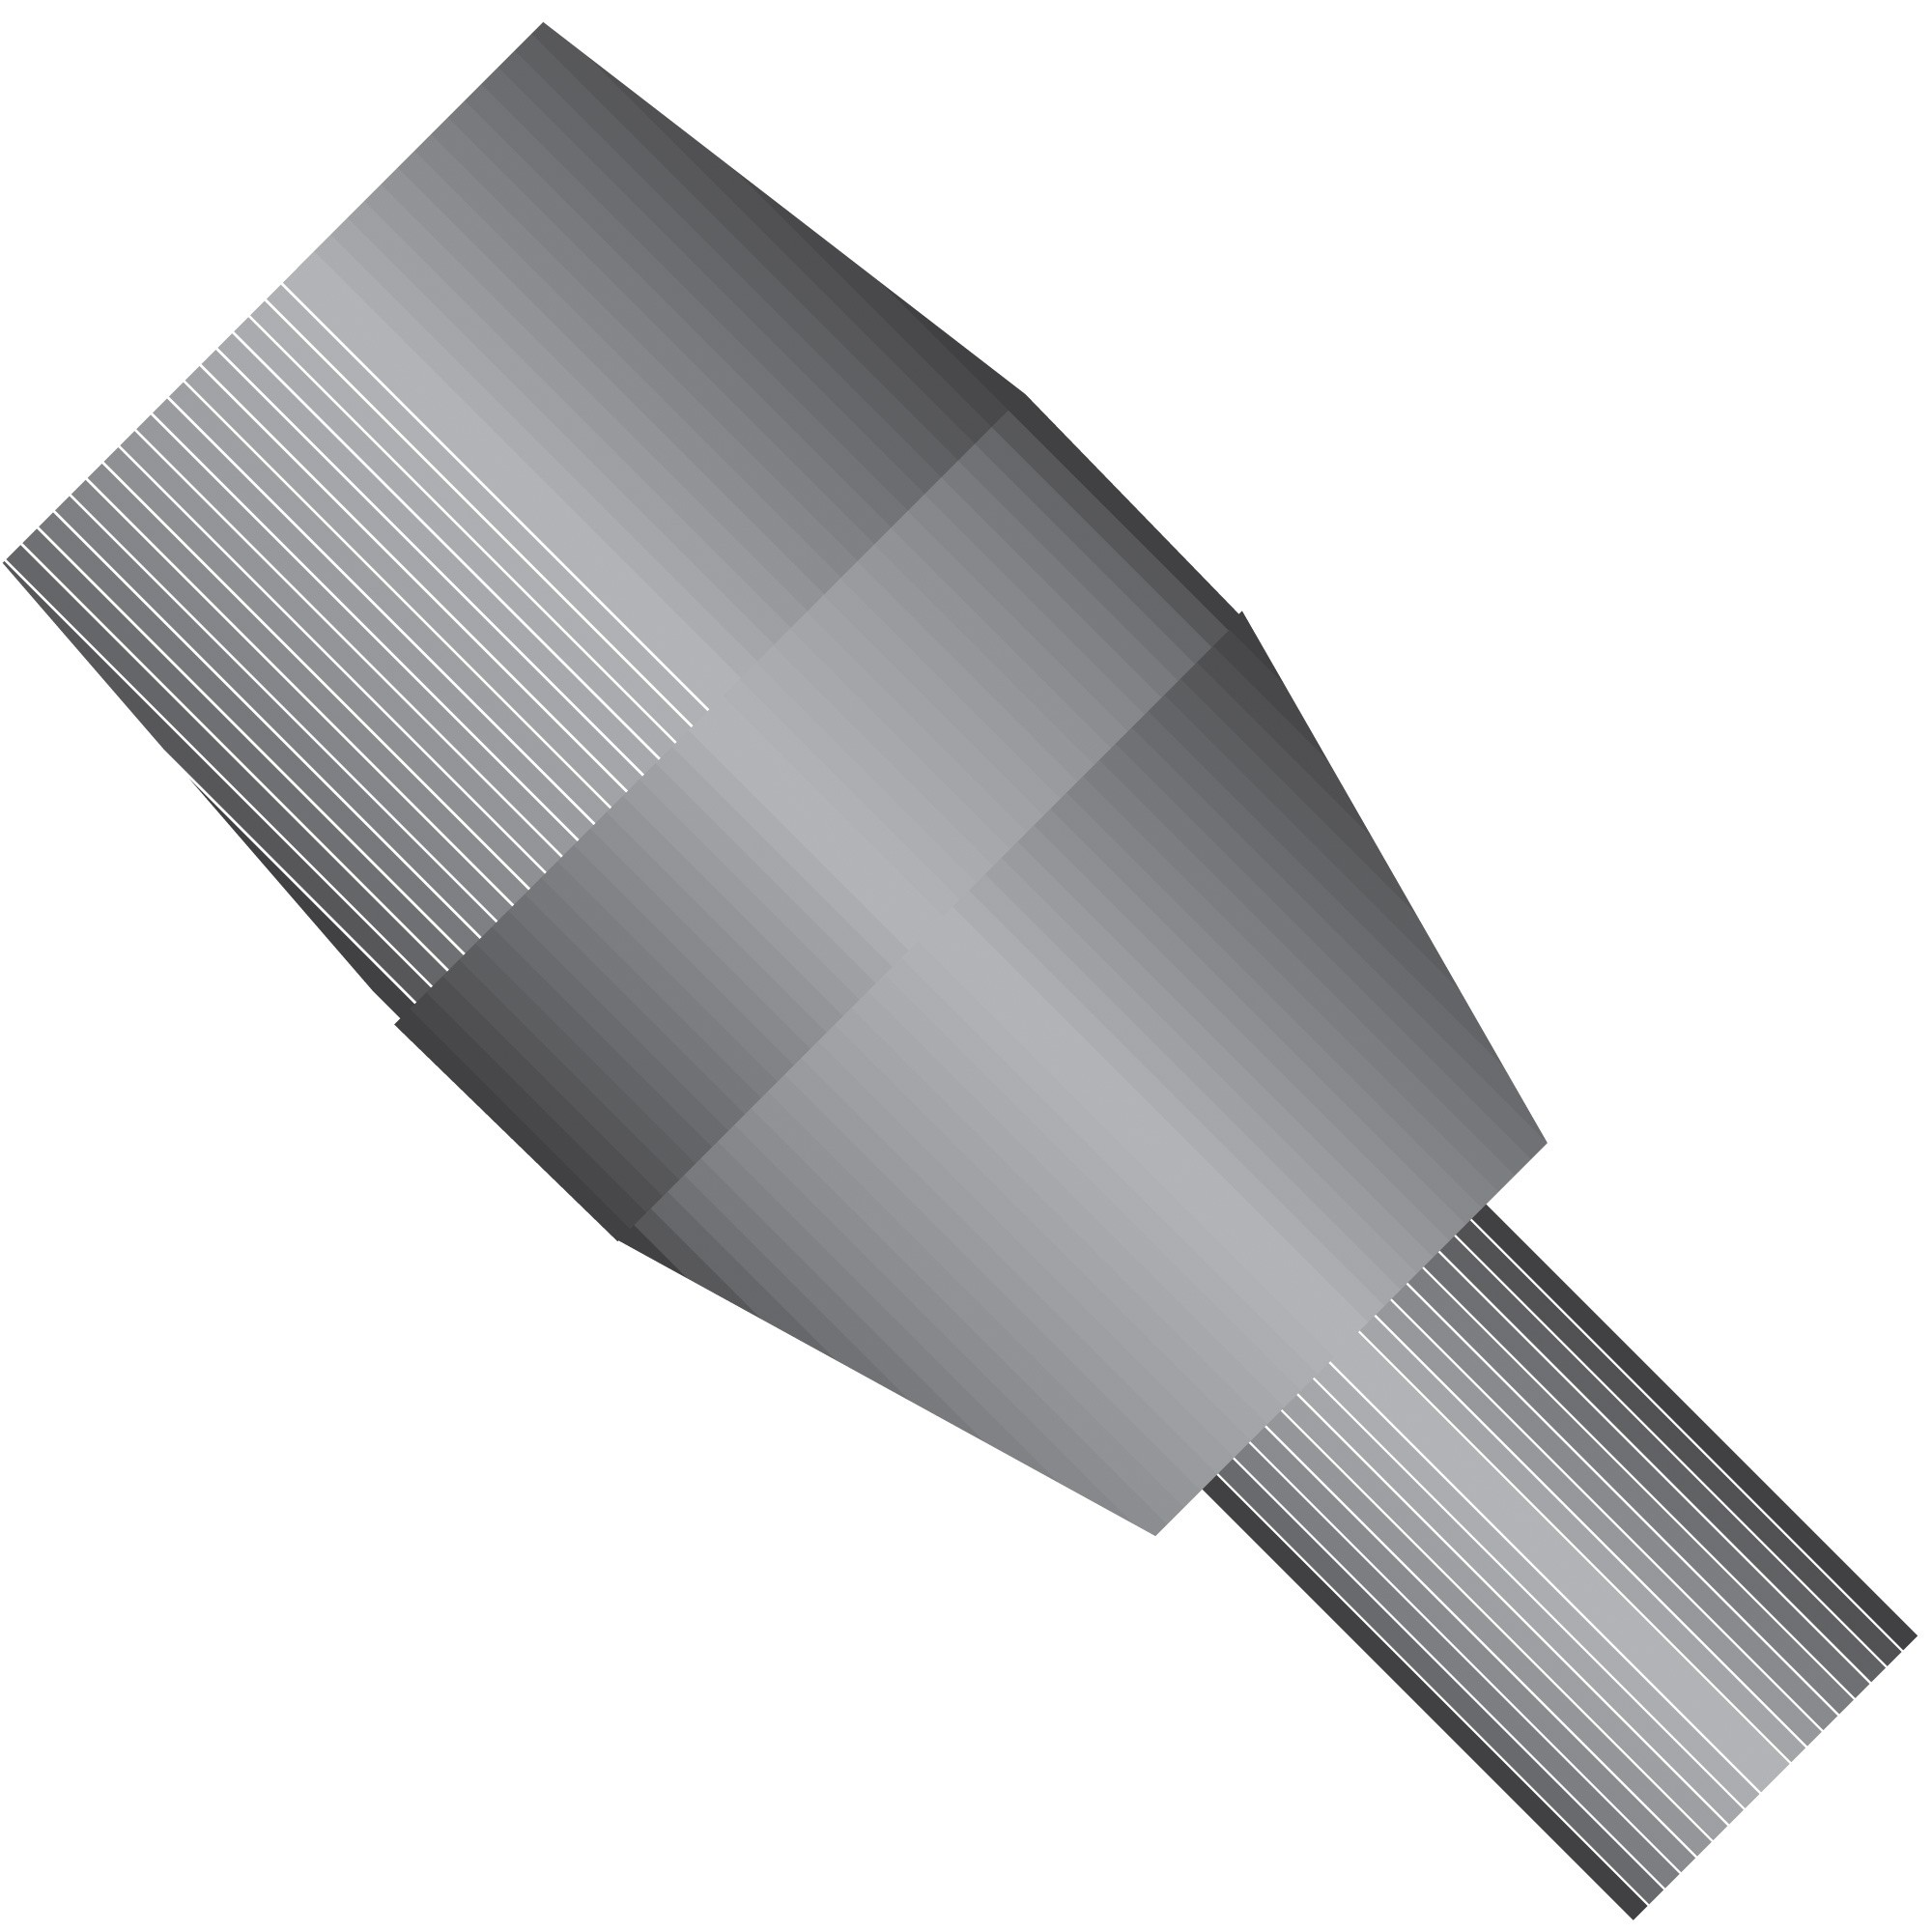 Conductive Ferrule, for 360 µm OD Tubing, 10-32 Coned, Conductive Perfluoroelastomer, Natural